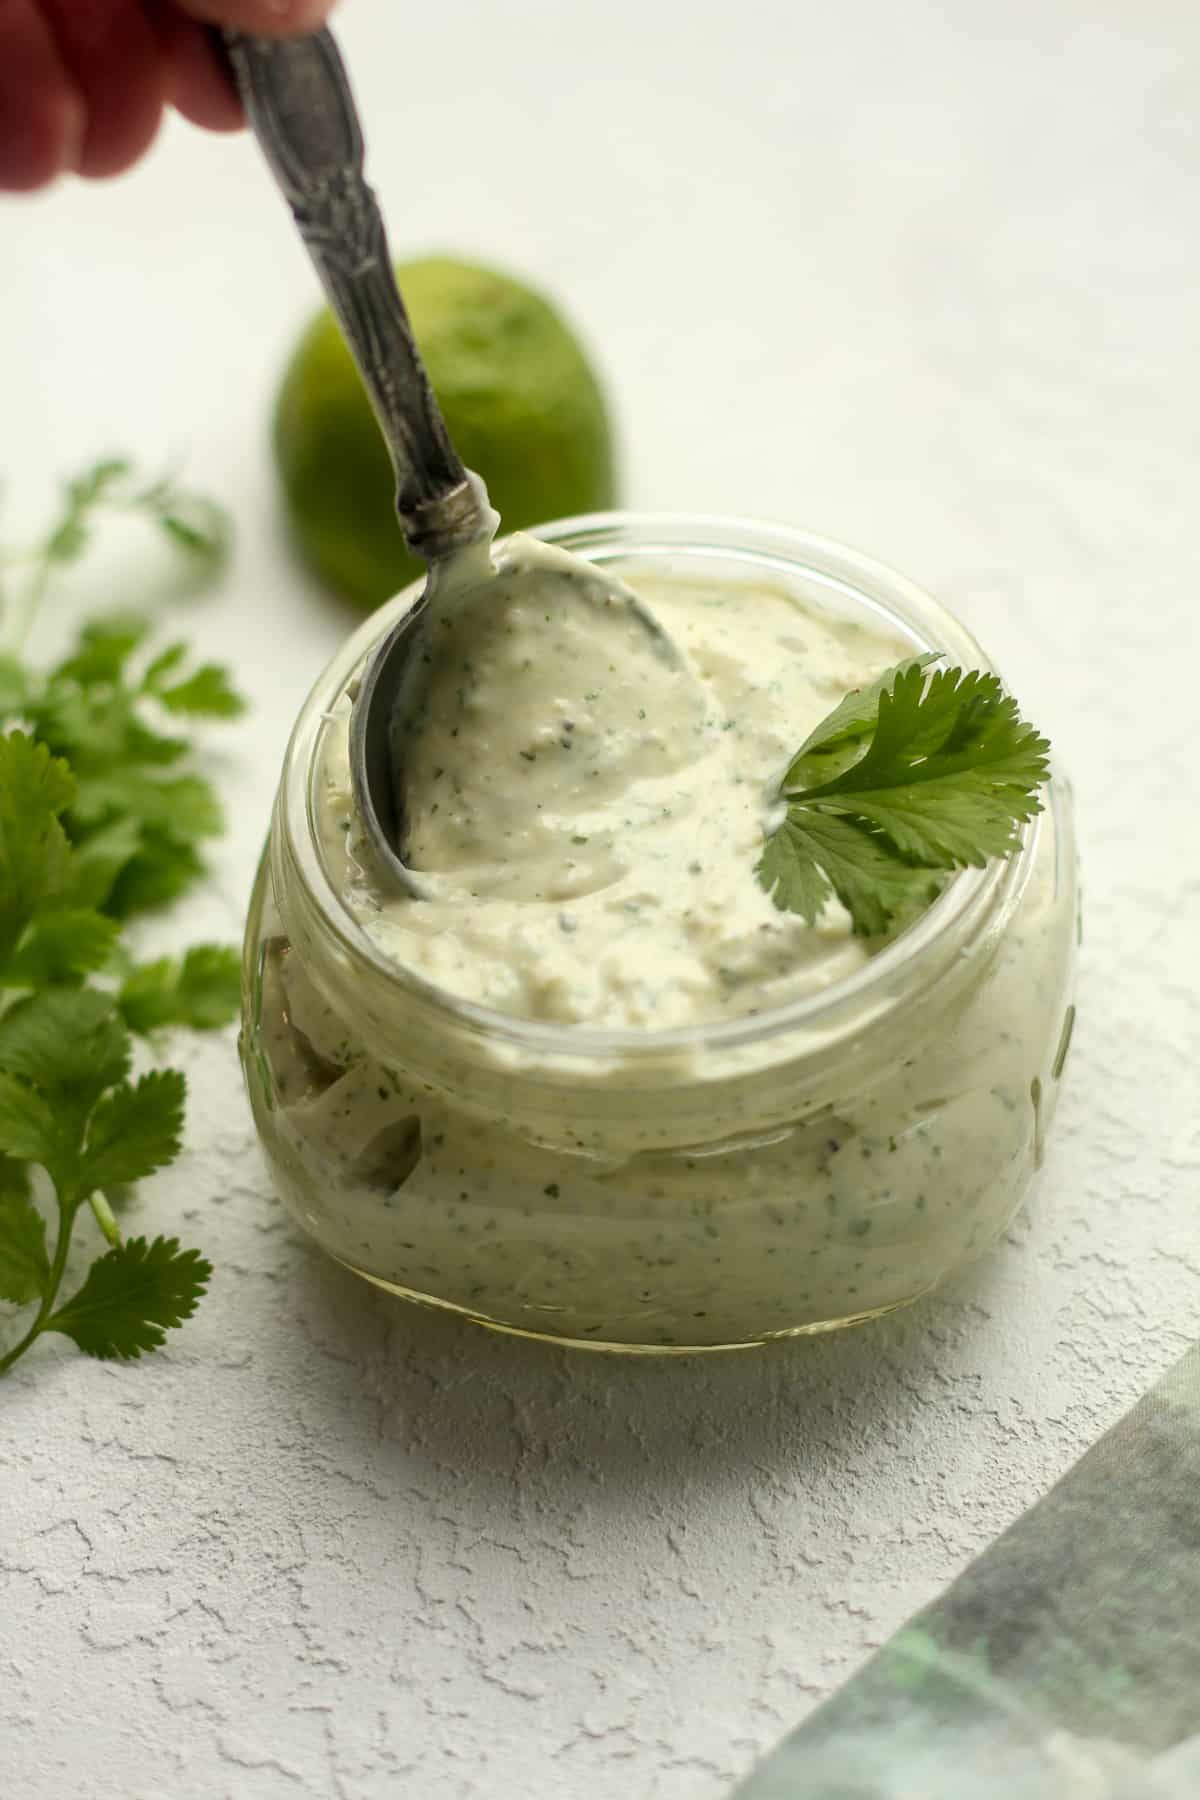 Side view of a jar of jalapeno ranch dressing with a tablespoon being lifted out.